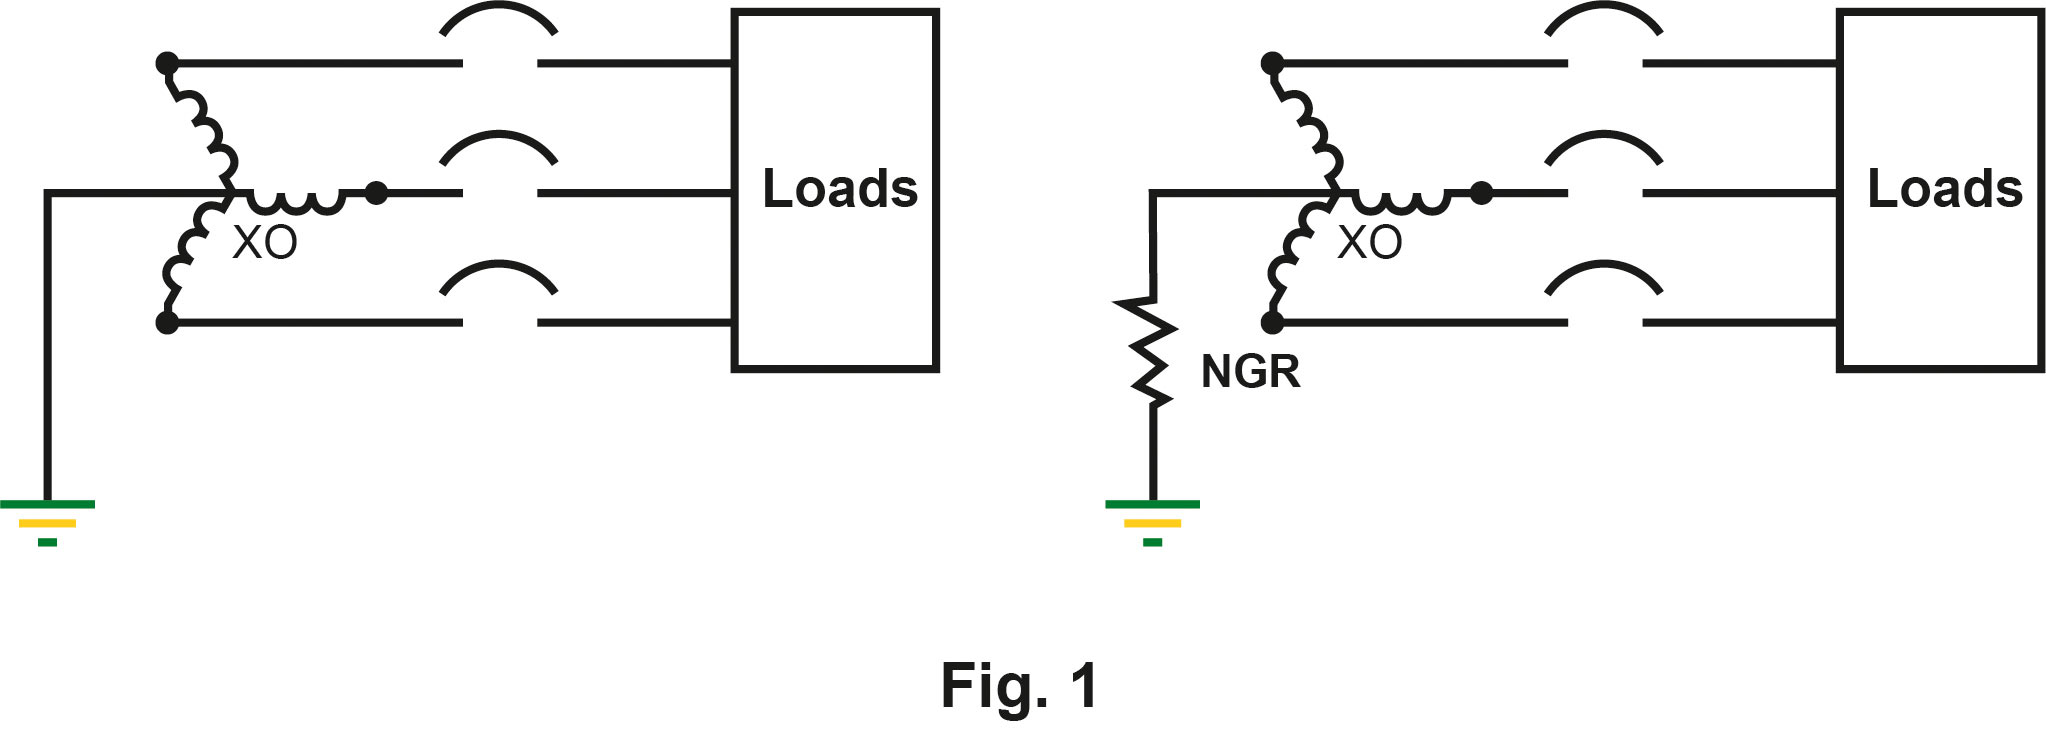 Grounding system with/ without NGR